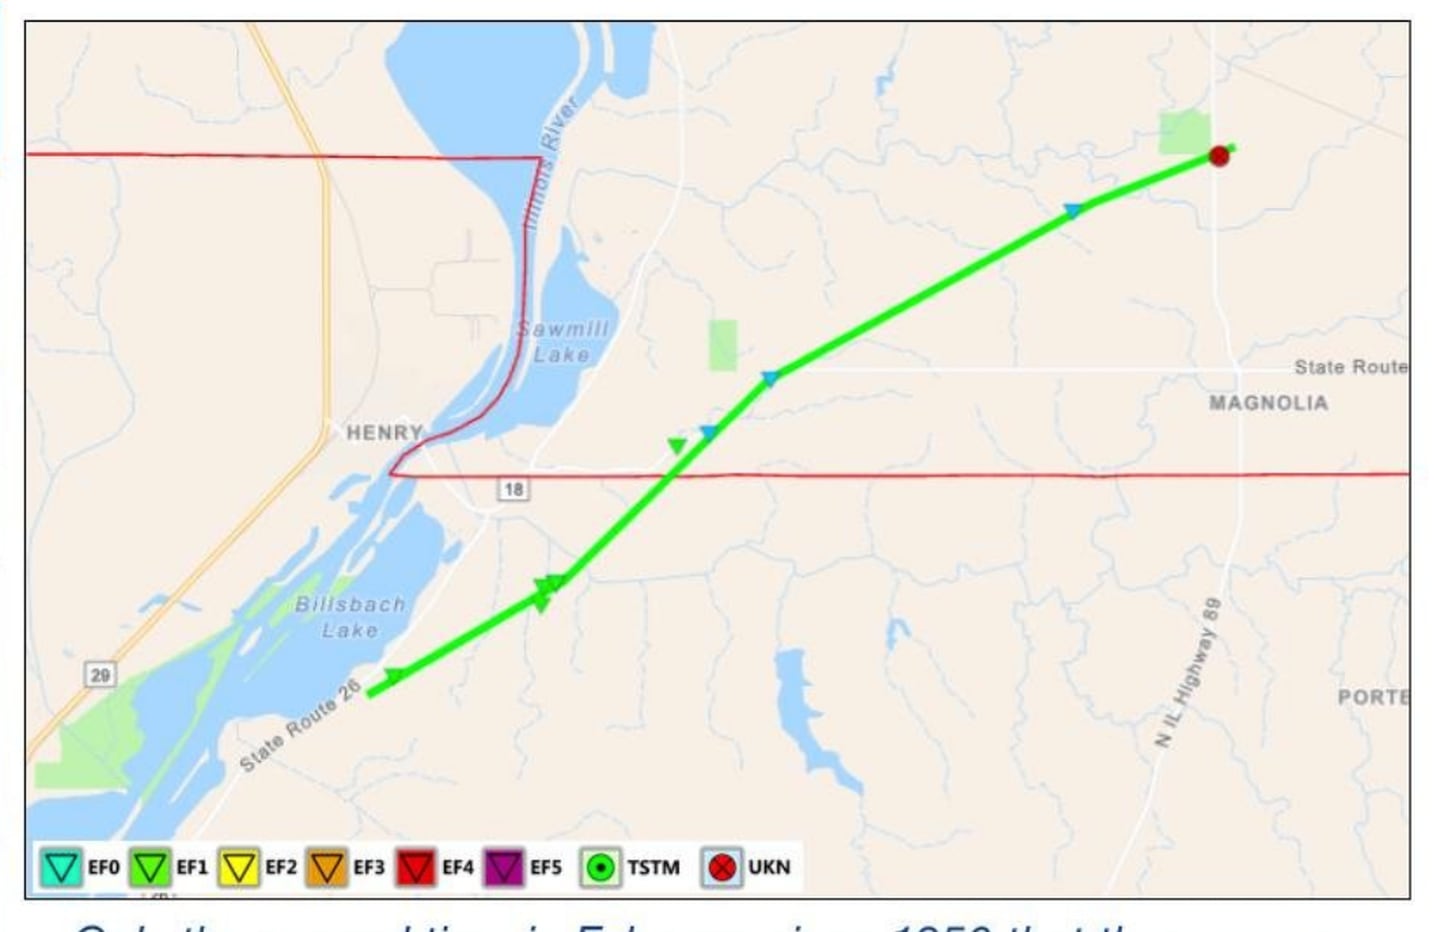 An EF-1 tornado with estimated winds of 110 mph was verified in Marshall and Putnam counties, according to the National Weather Service in the Quad Cities.